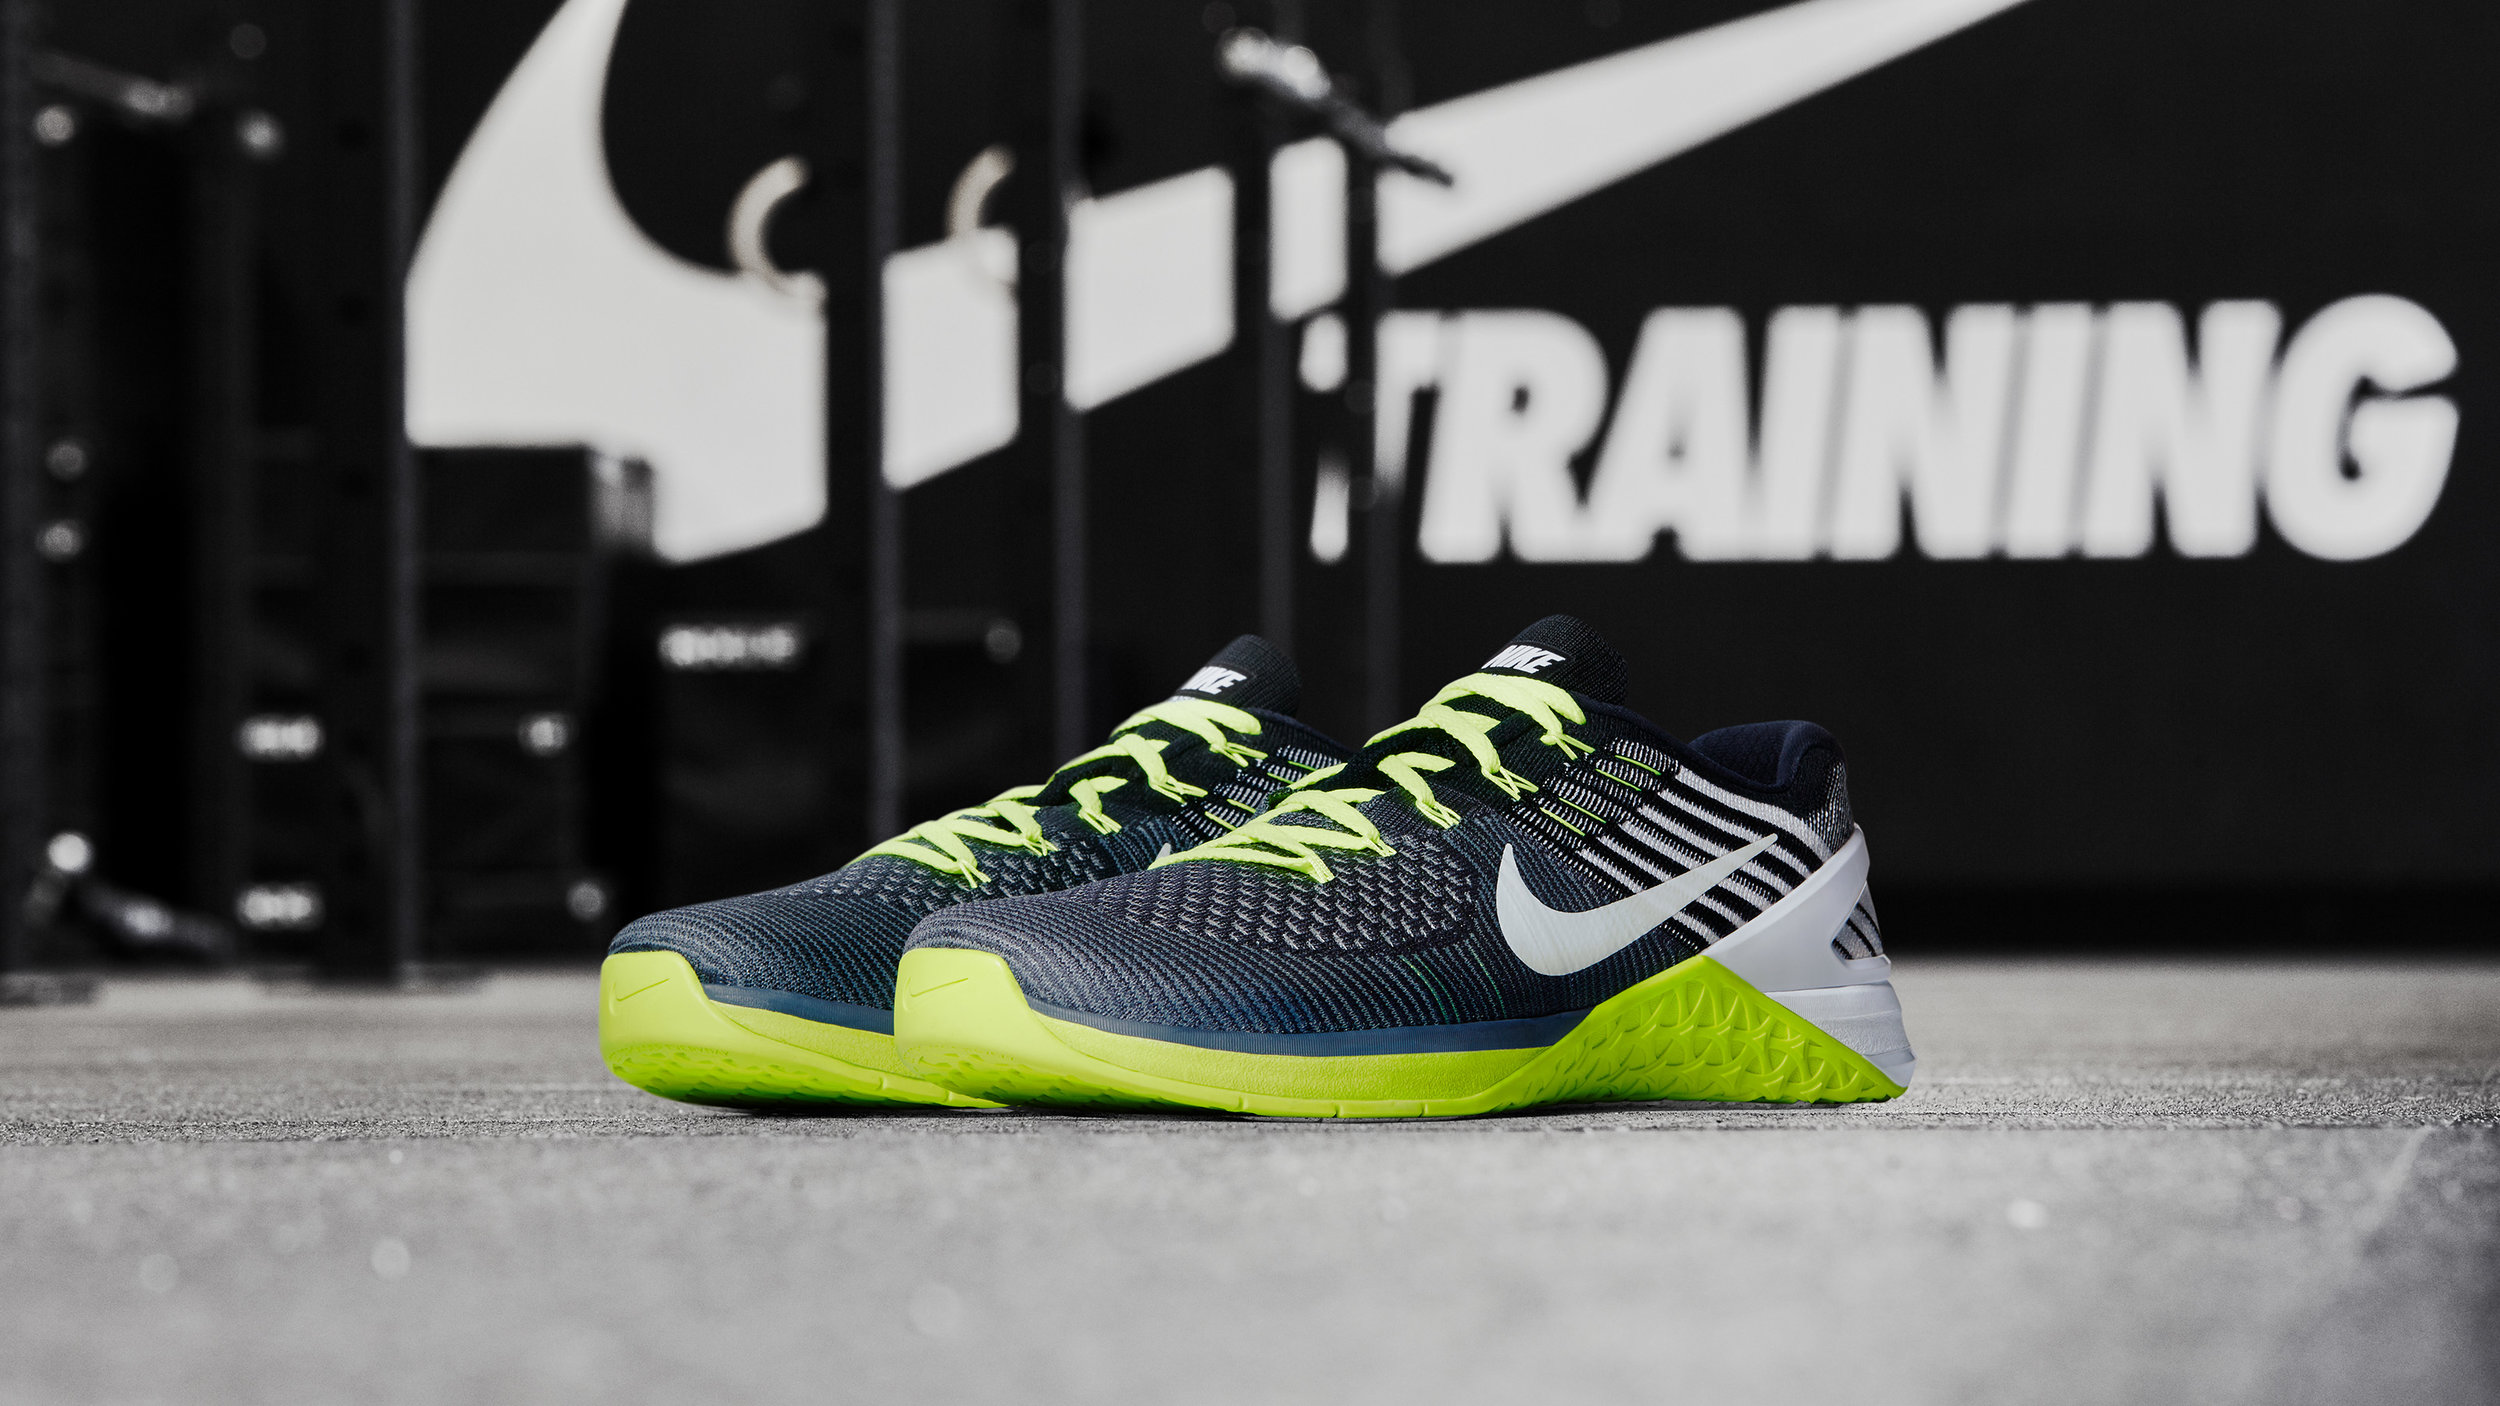 Mathis Amanecer Niños Introducing the Nike Metcon DSX Flyknit & The Metcon 3 | Nike Training —  FITFLYFELLOW